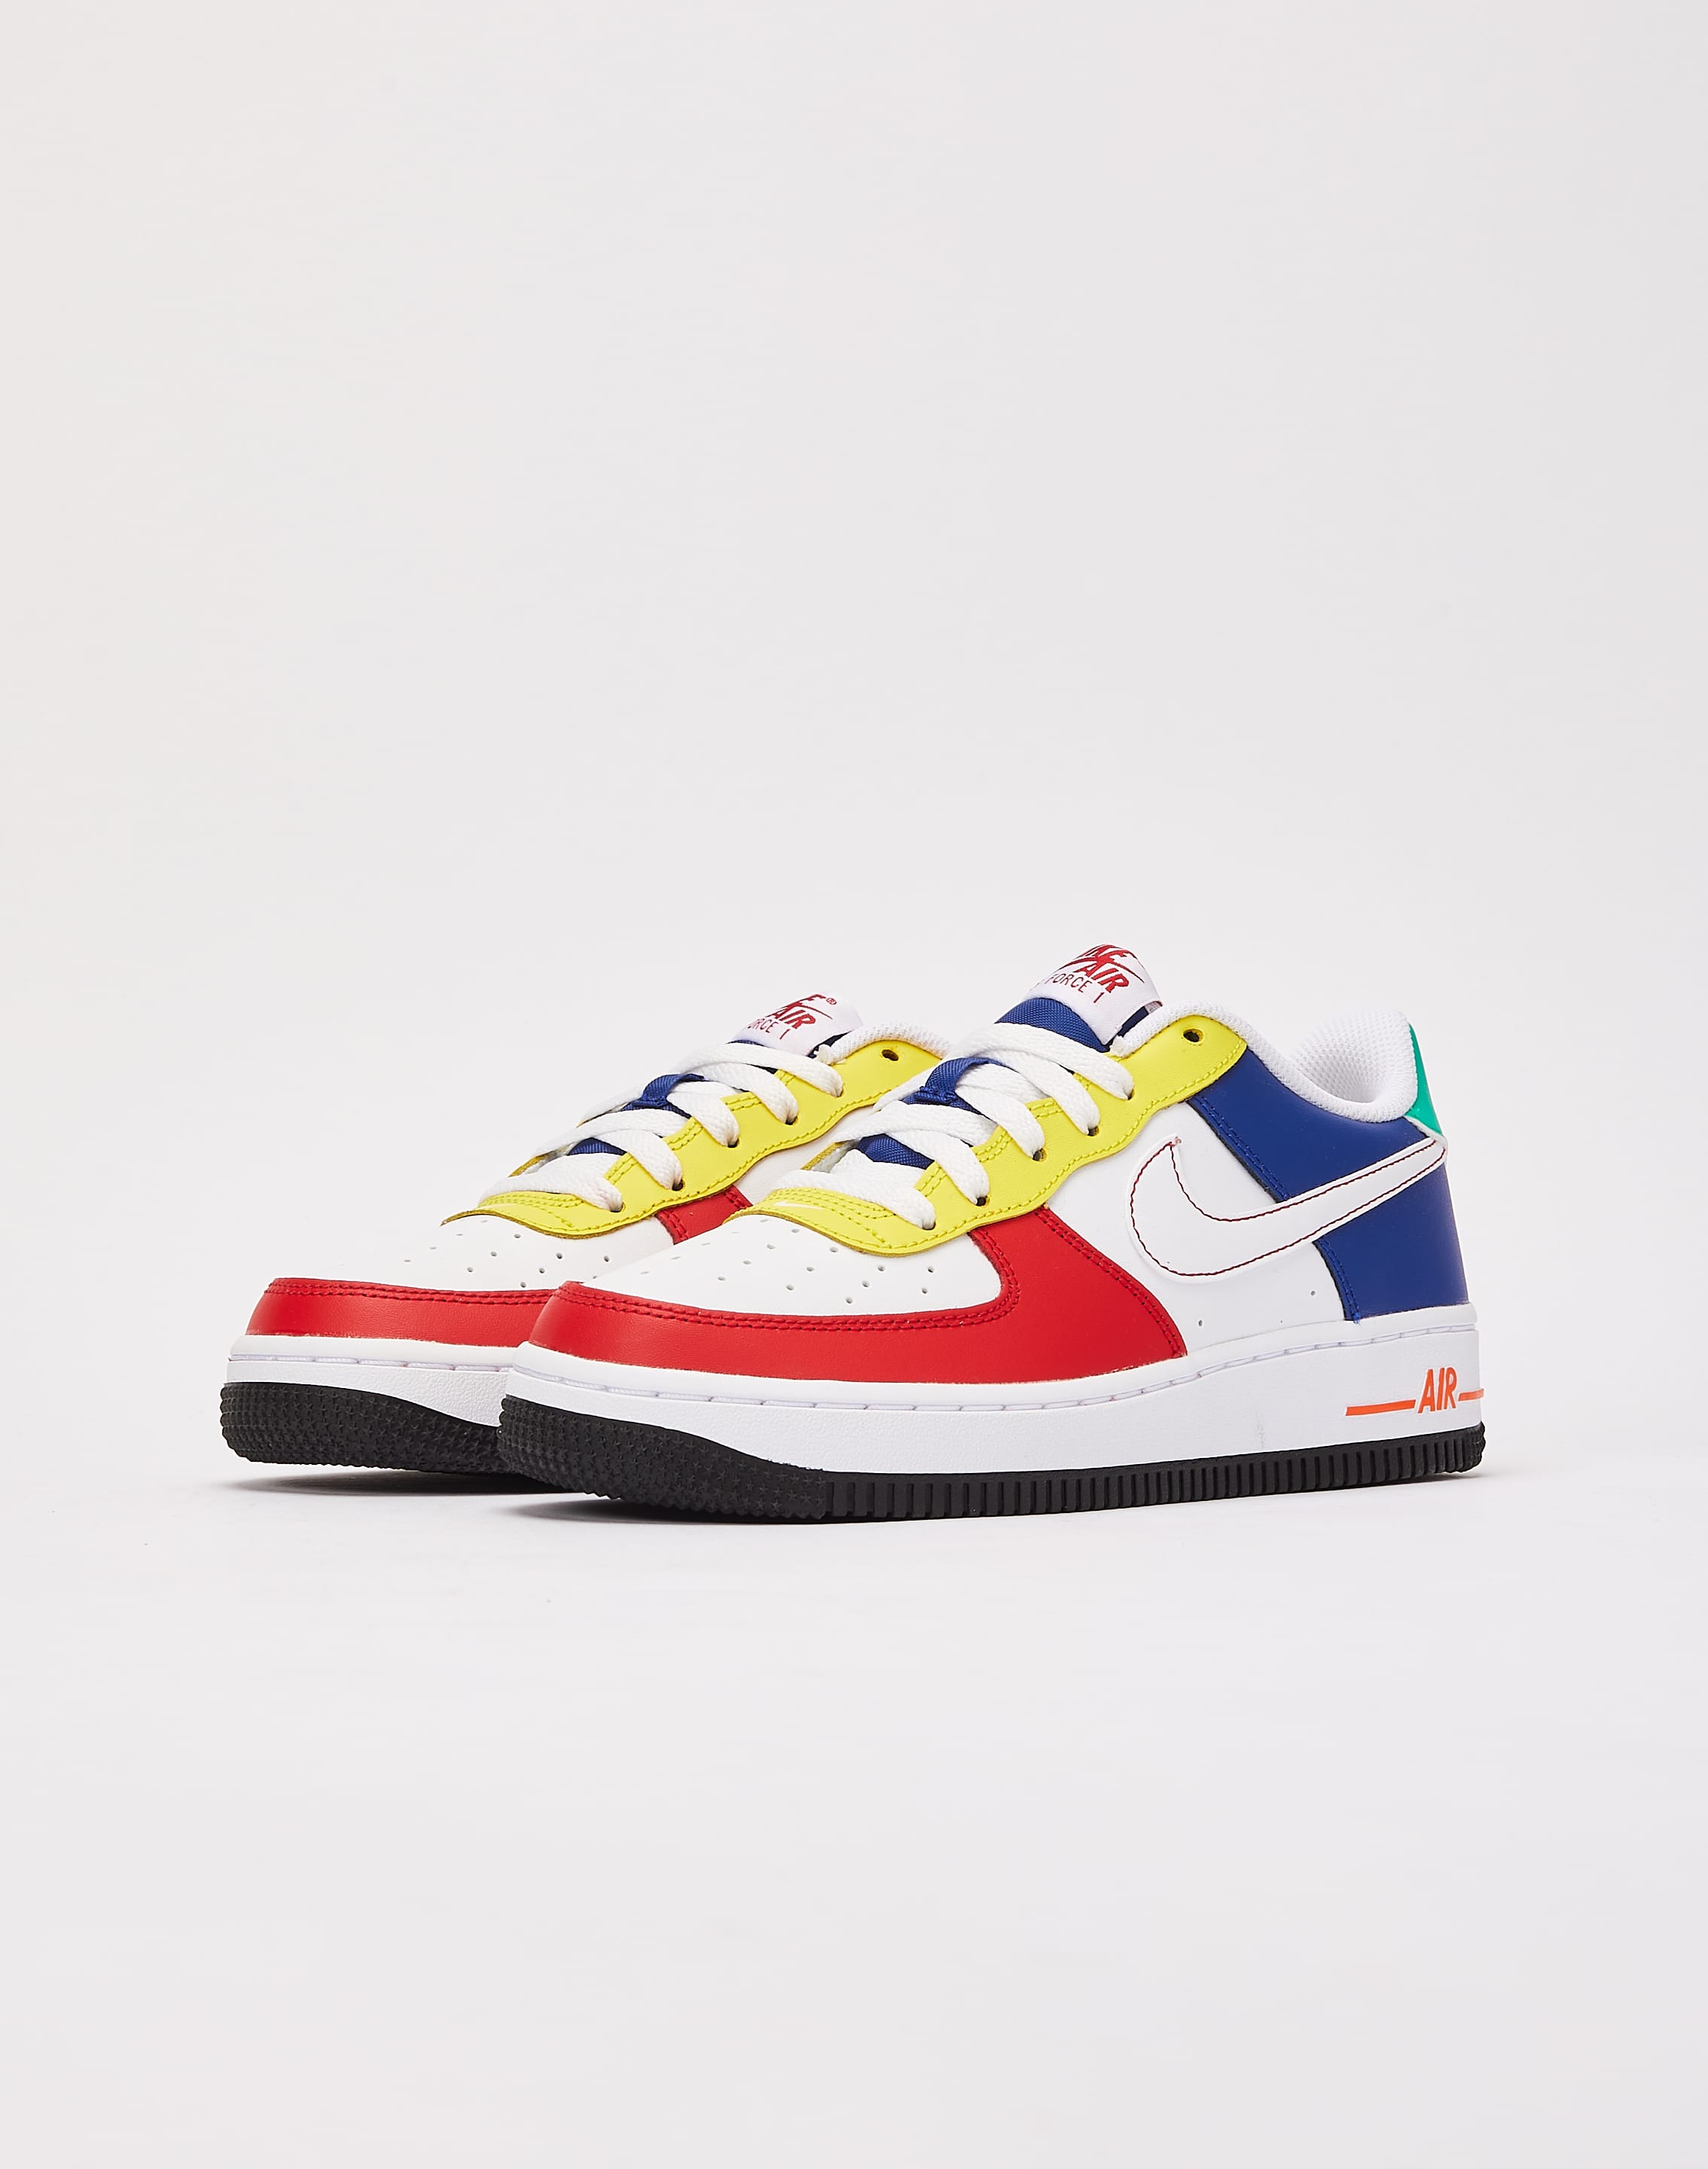 Nike Big Kids' Air Force 1 LV8 Casual Shoes Size 7.0 Leather Multicolor/Multicolor/Multicolor